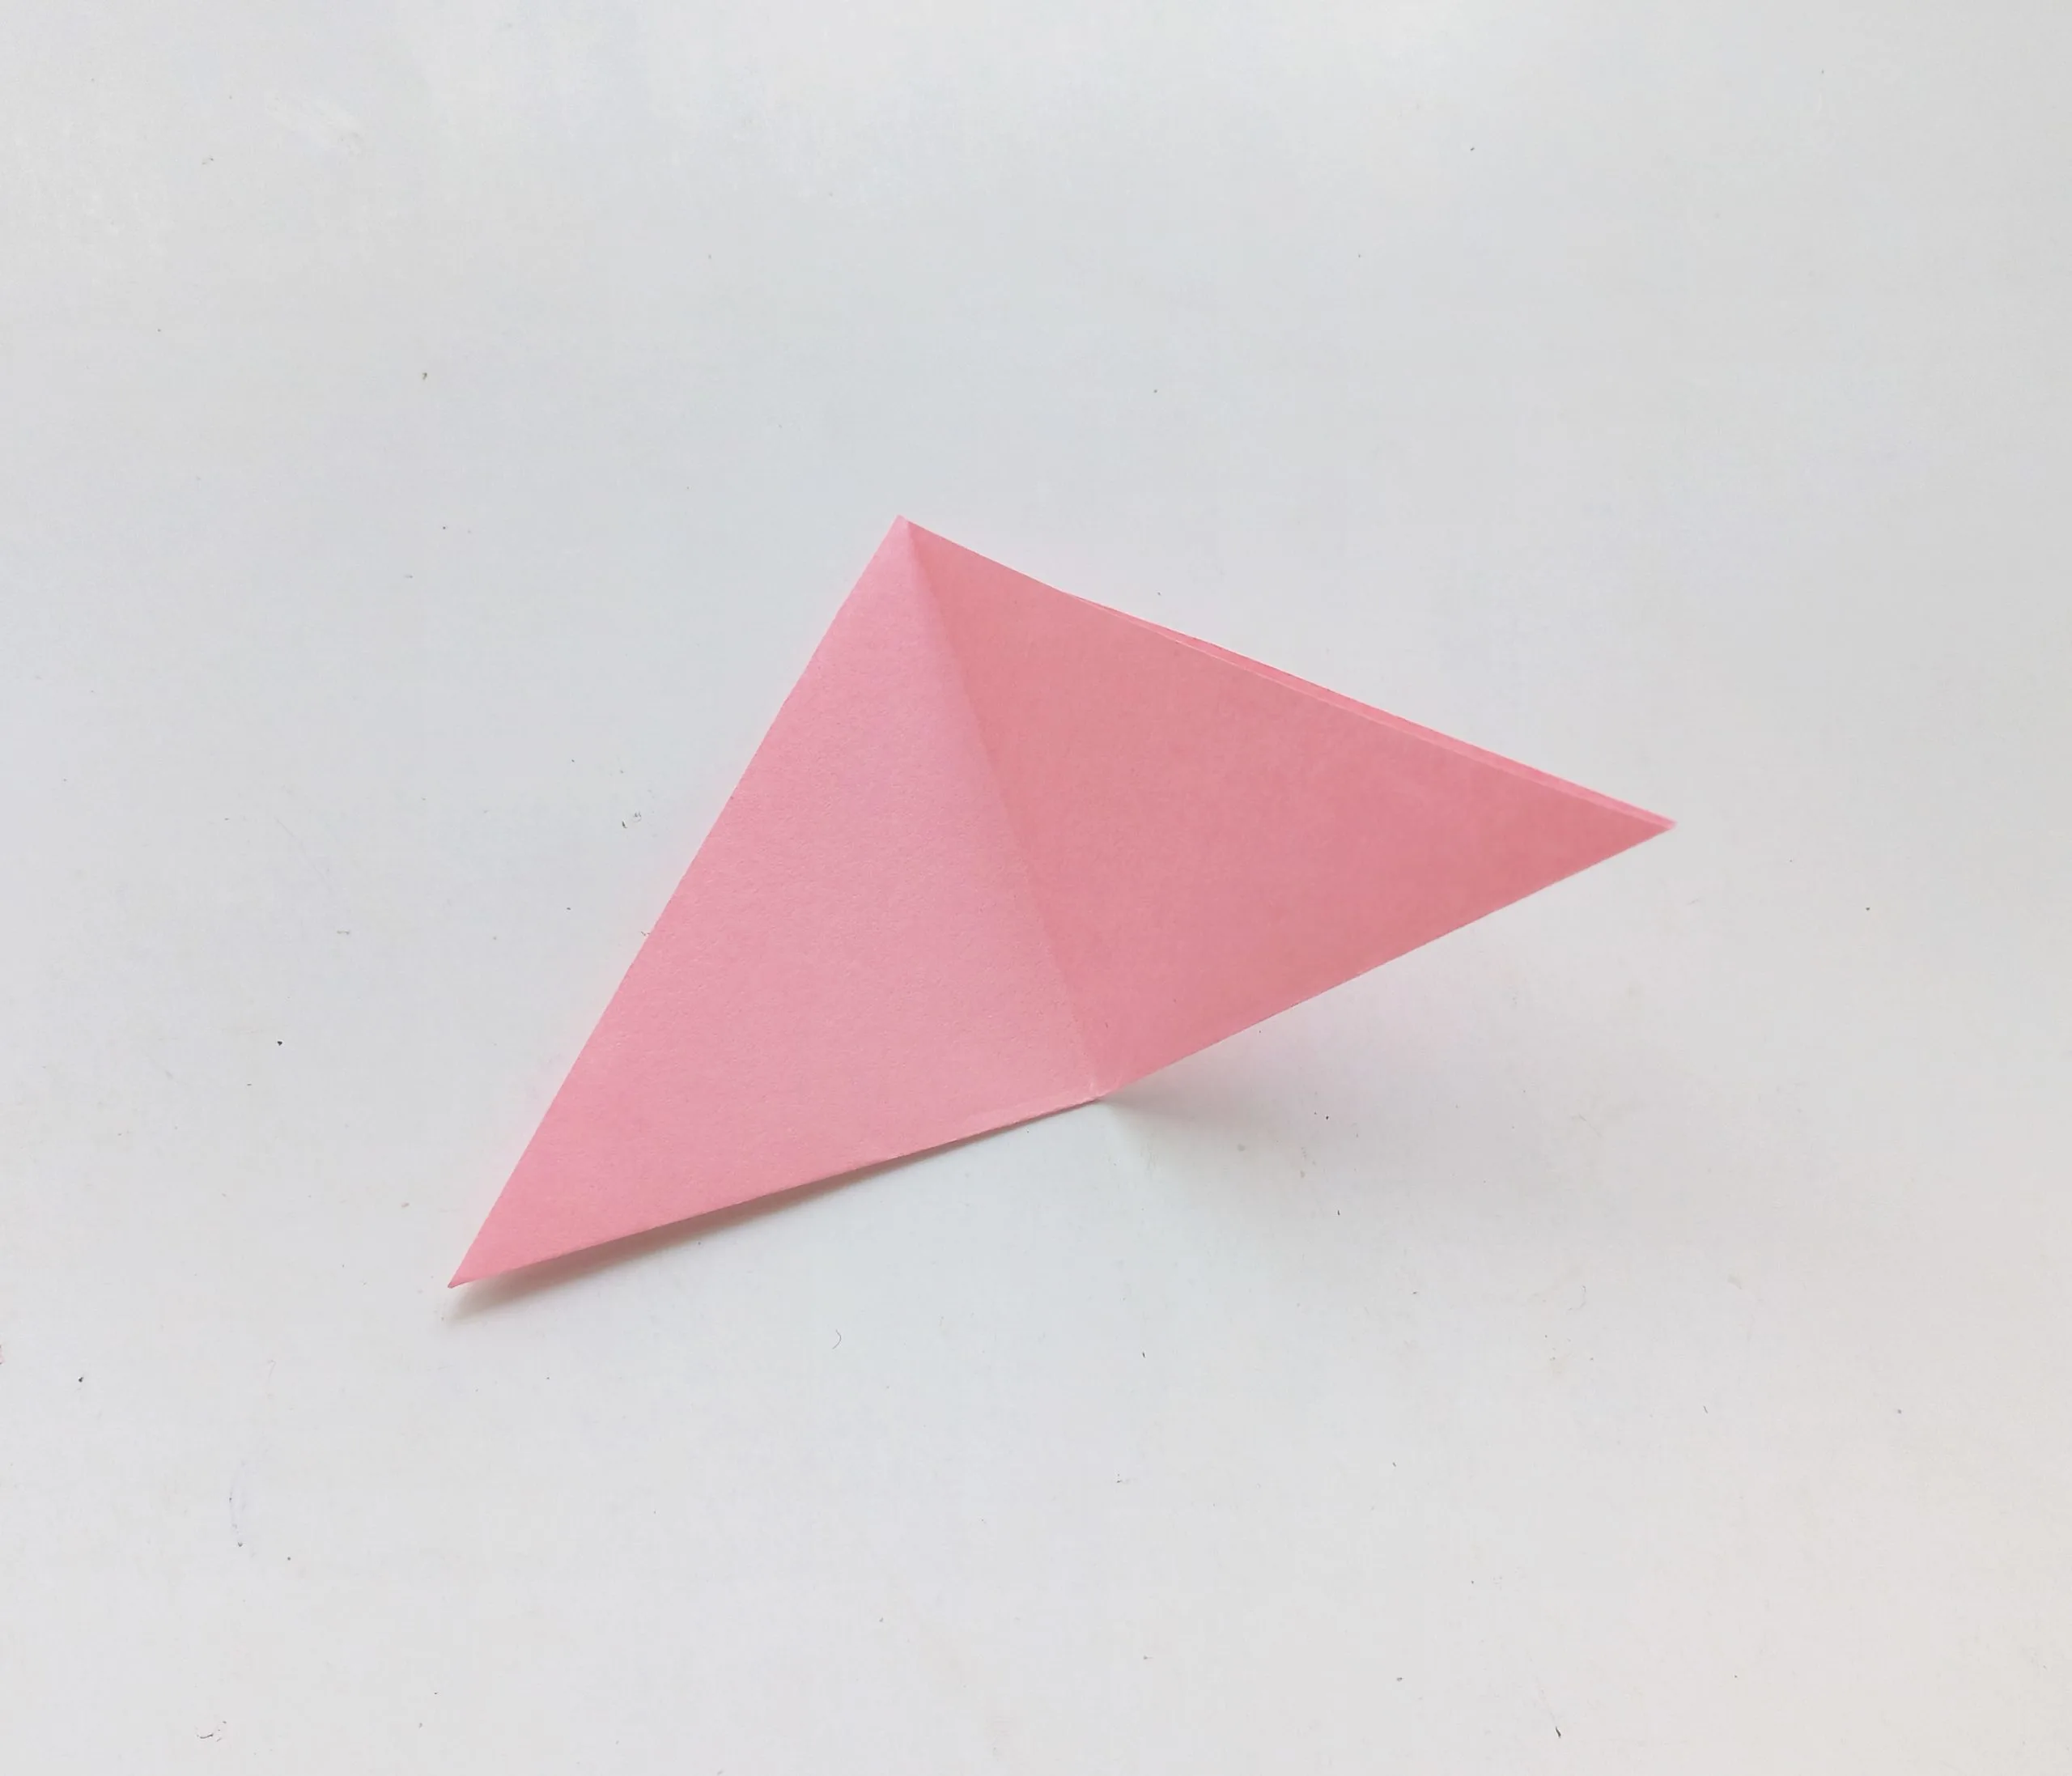 tulip origami step by step